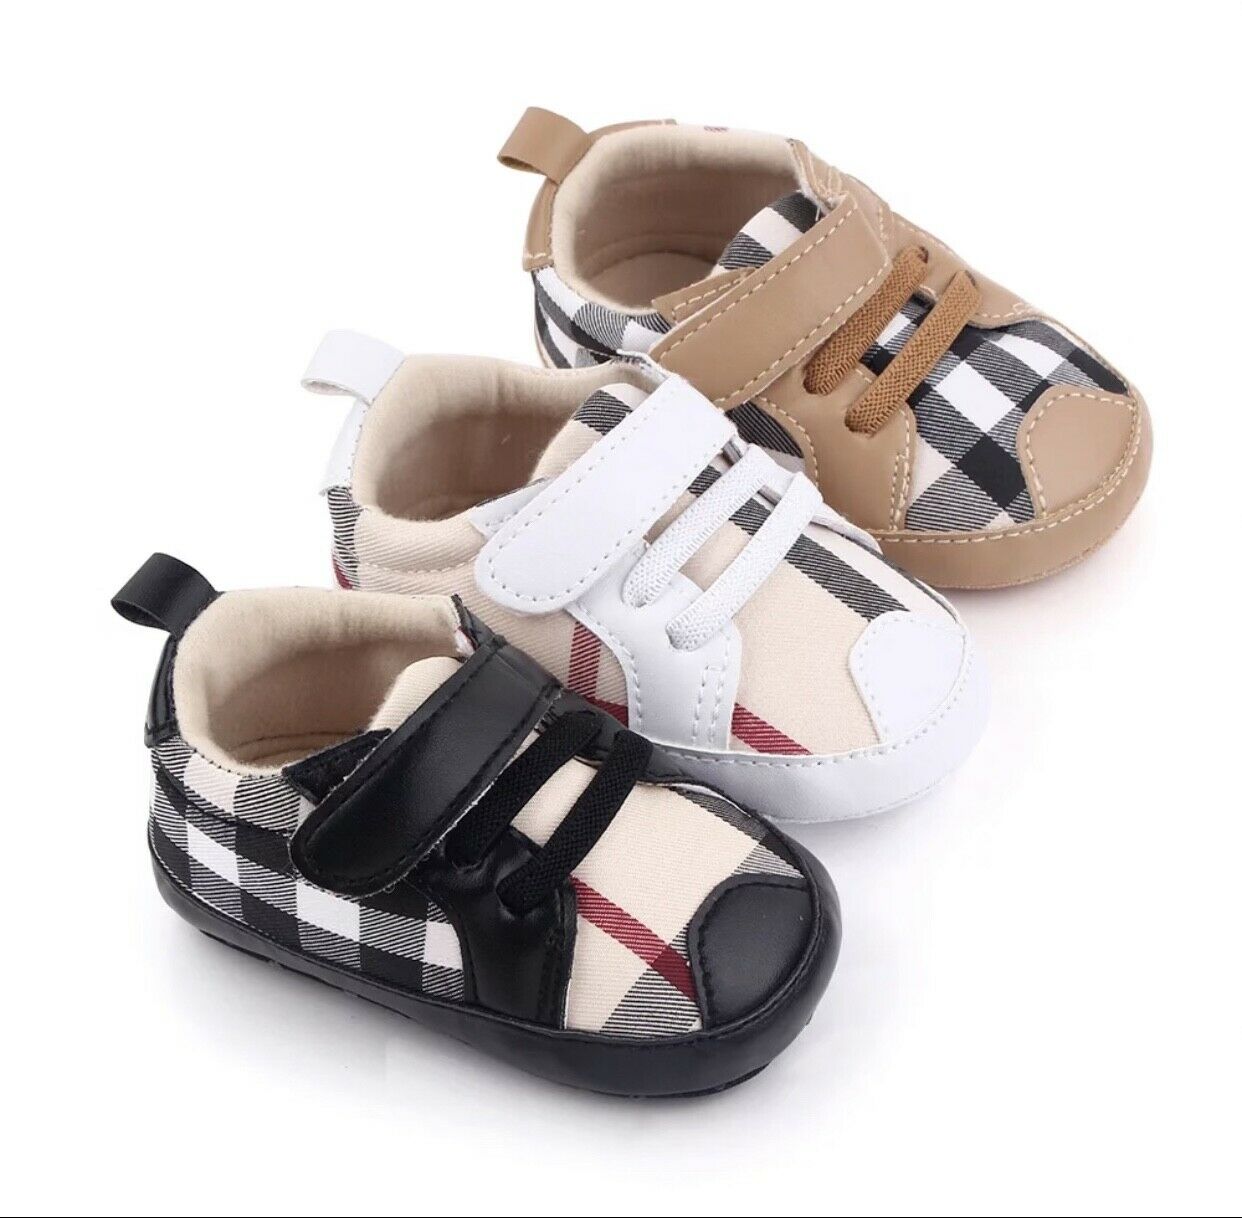 Baby Shoes Soft Leather Shoes for Newborn with Easy Closure